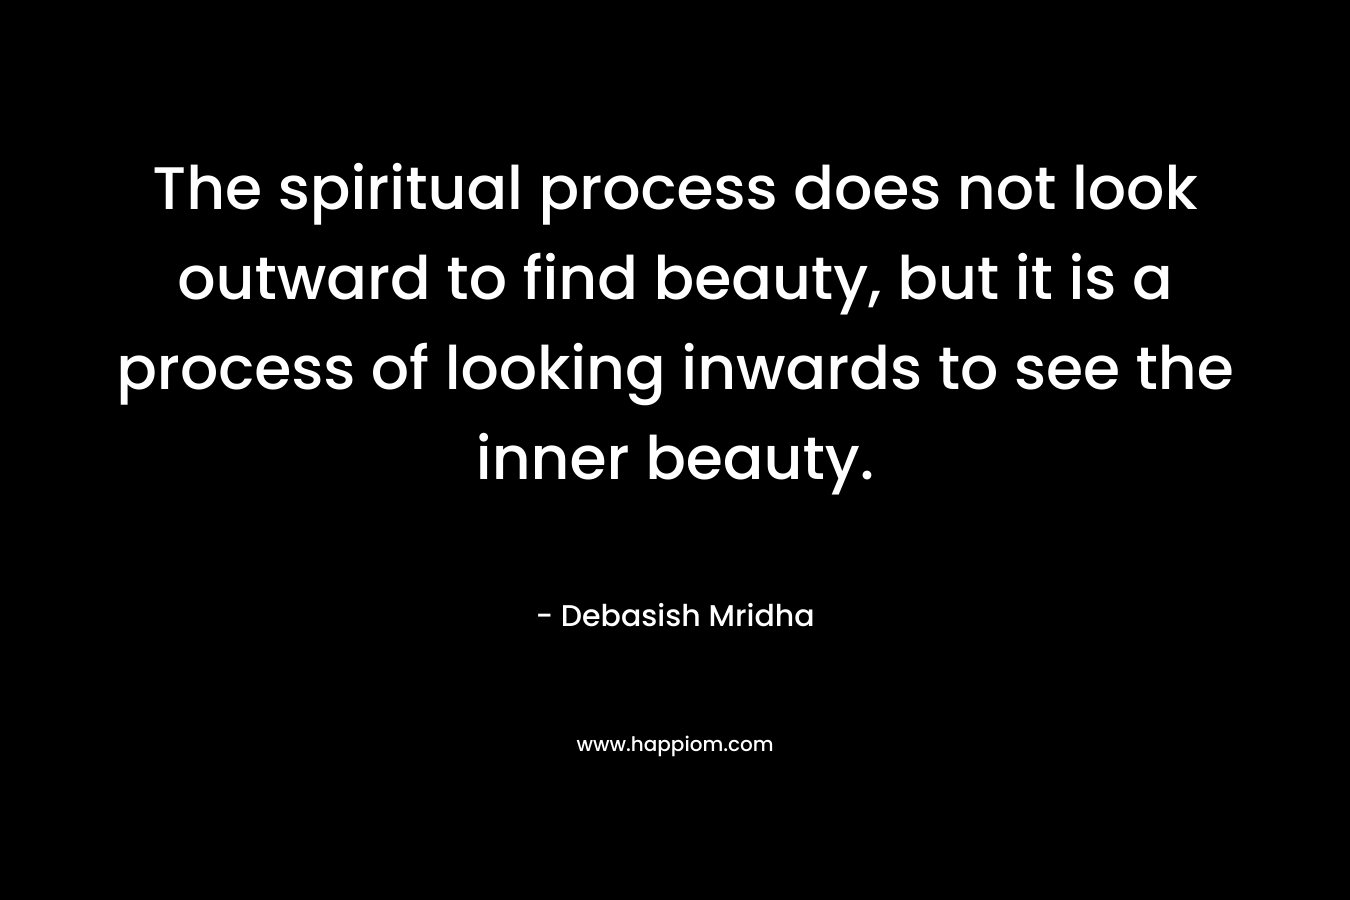 The spiritual process does not look outward to find beauty, but it is a process of looking inwards to see the inner beauty. – Debasish Mridha